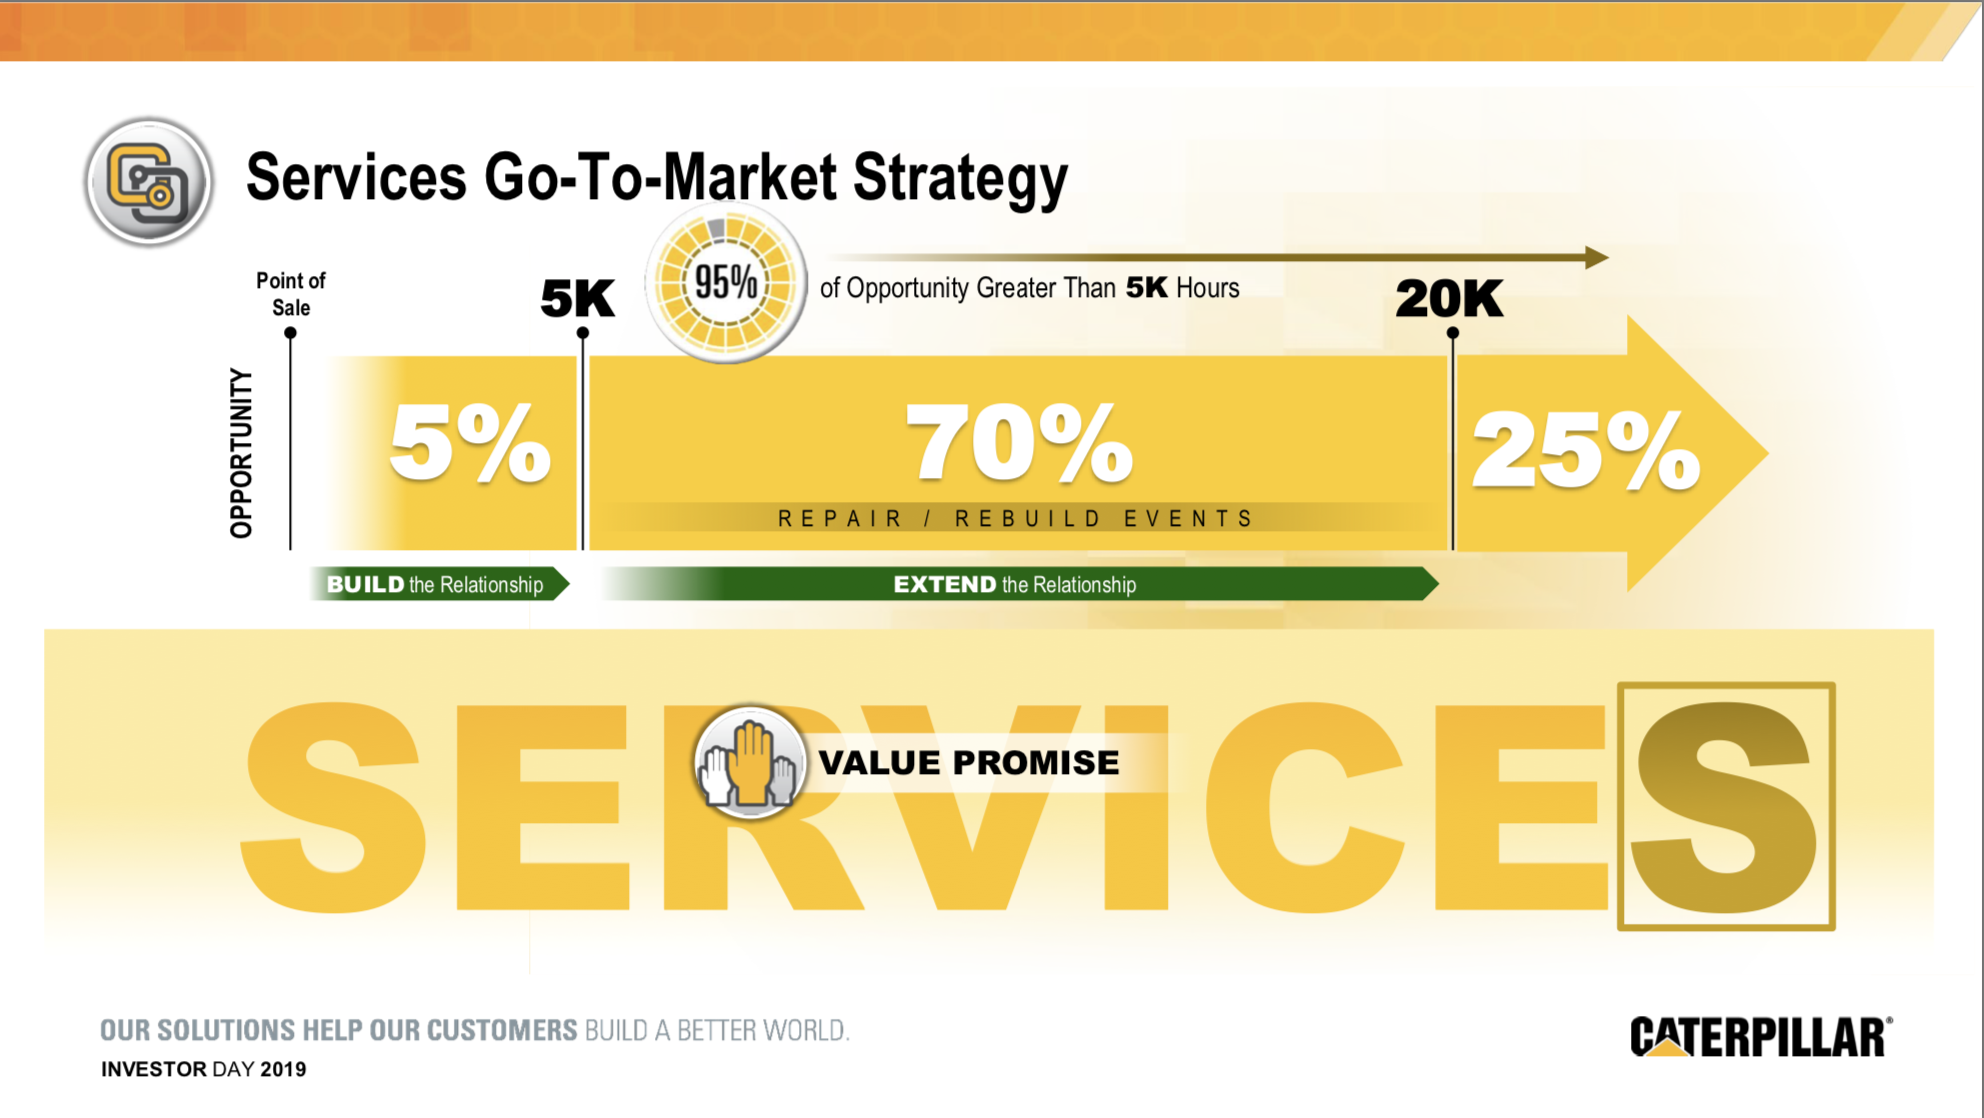 caterpillar services go-to-market strategy